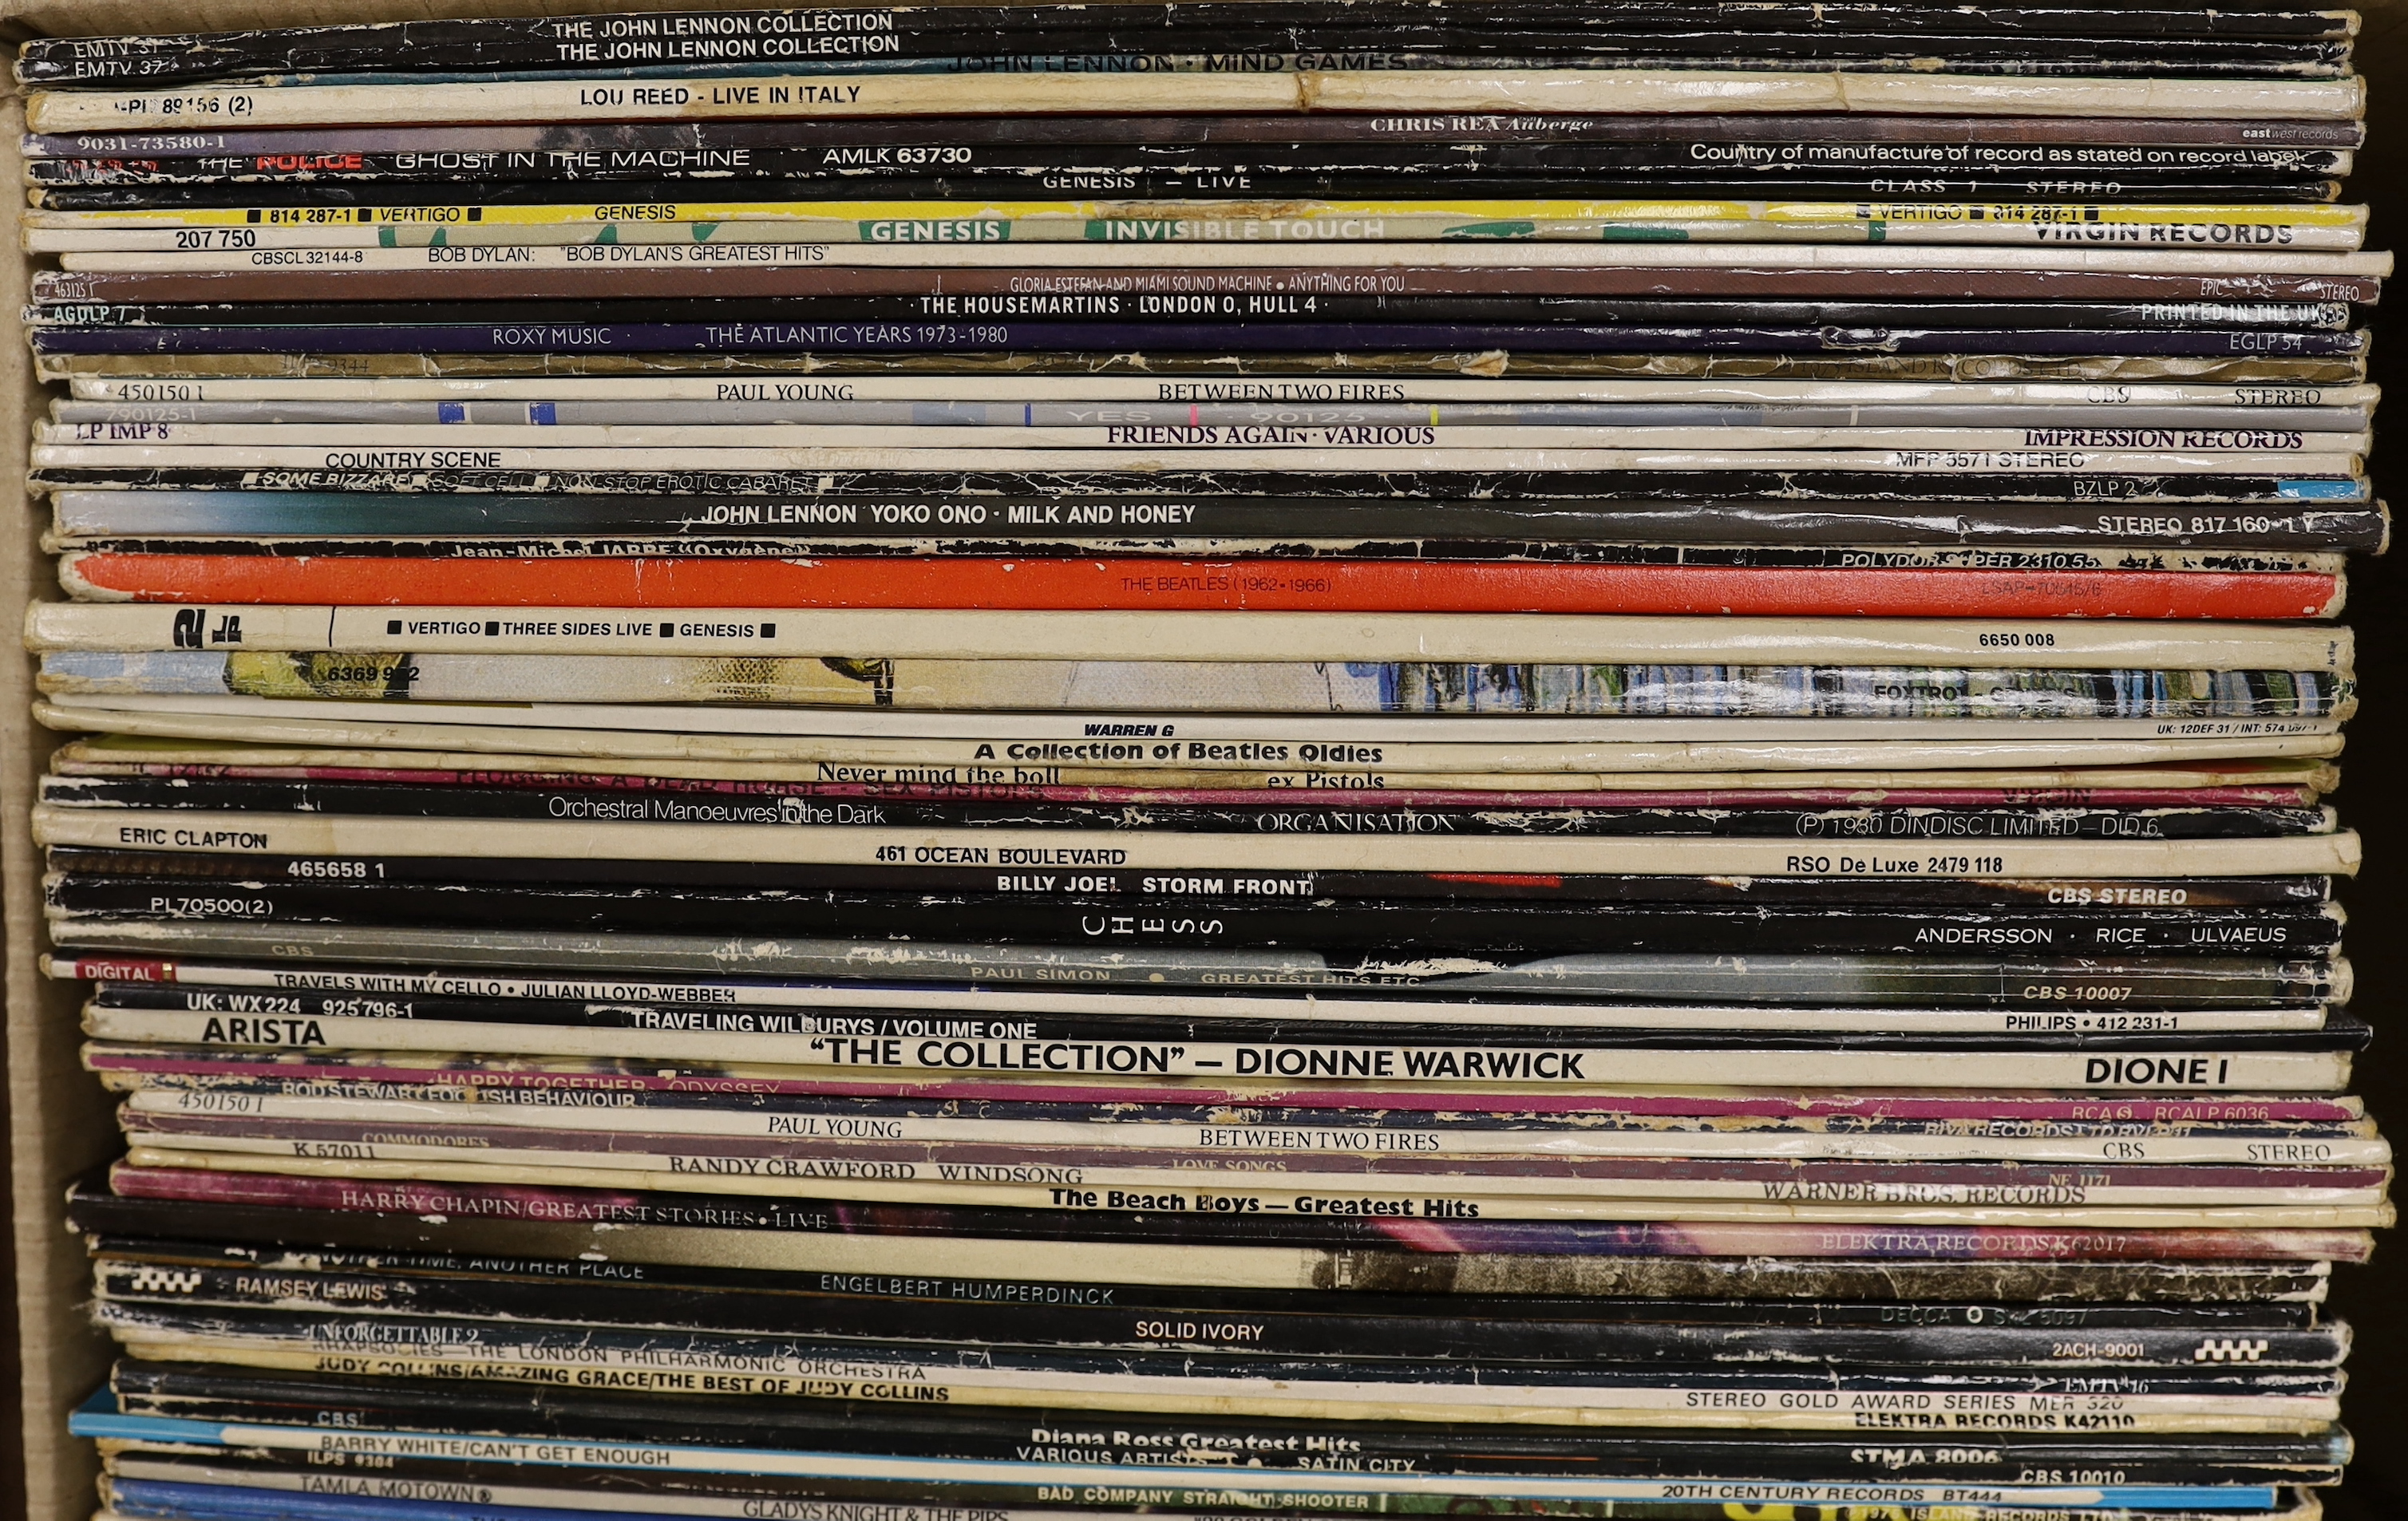 Eighty mostly 1970s LPs etc., including John Lennon, Lou Reed, The Police, Genesis, The Housemartins, Roxy Music, Paul Young, The Beatles, Sex Pistols, Billy Joel, Paul Simon, Rod Stewart, Madness, Leo Sayer, Phil Collin